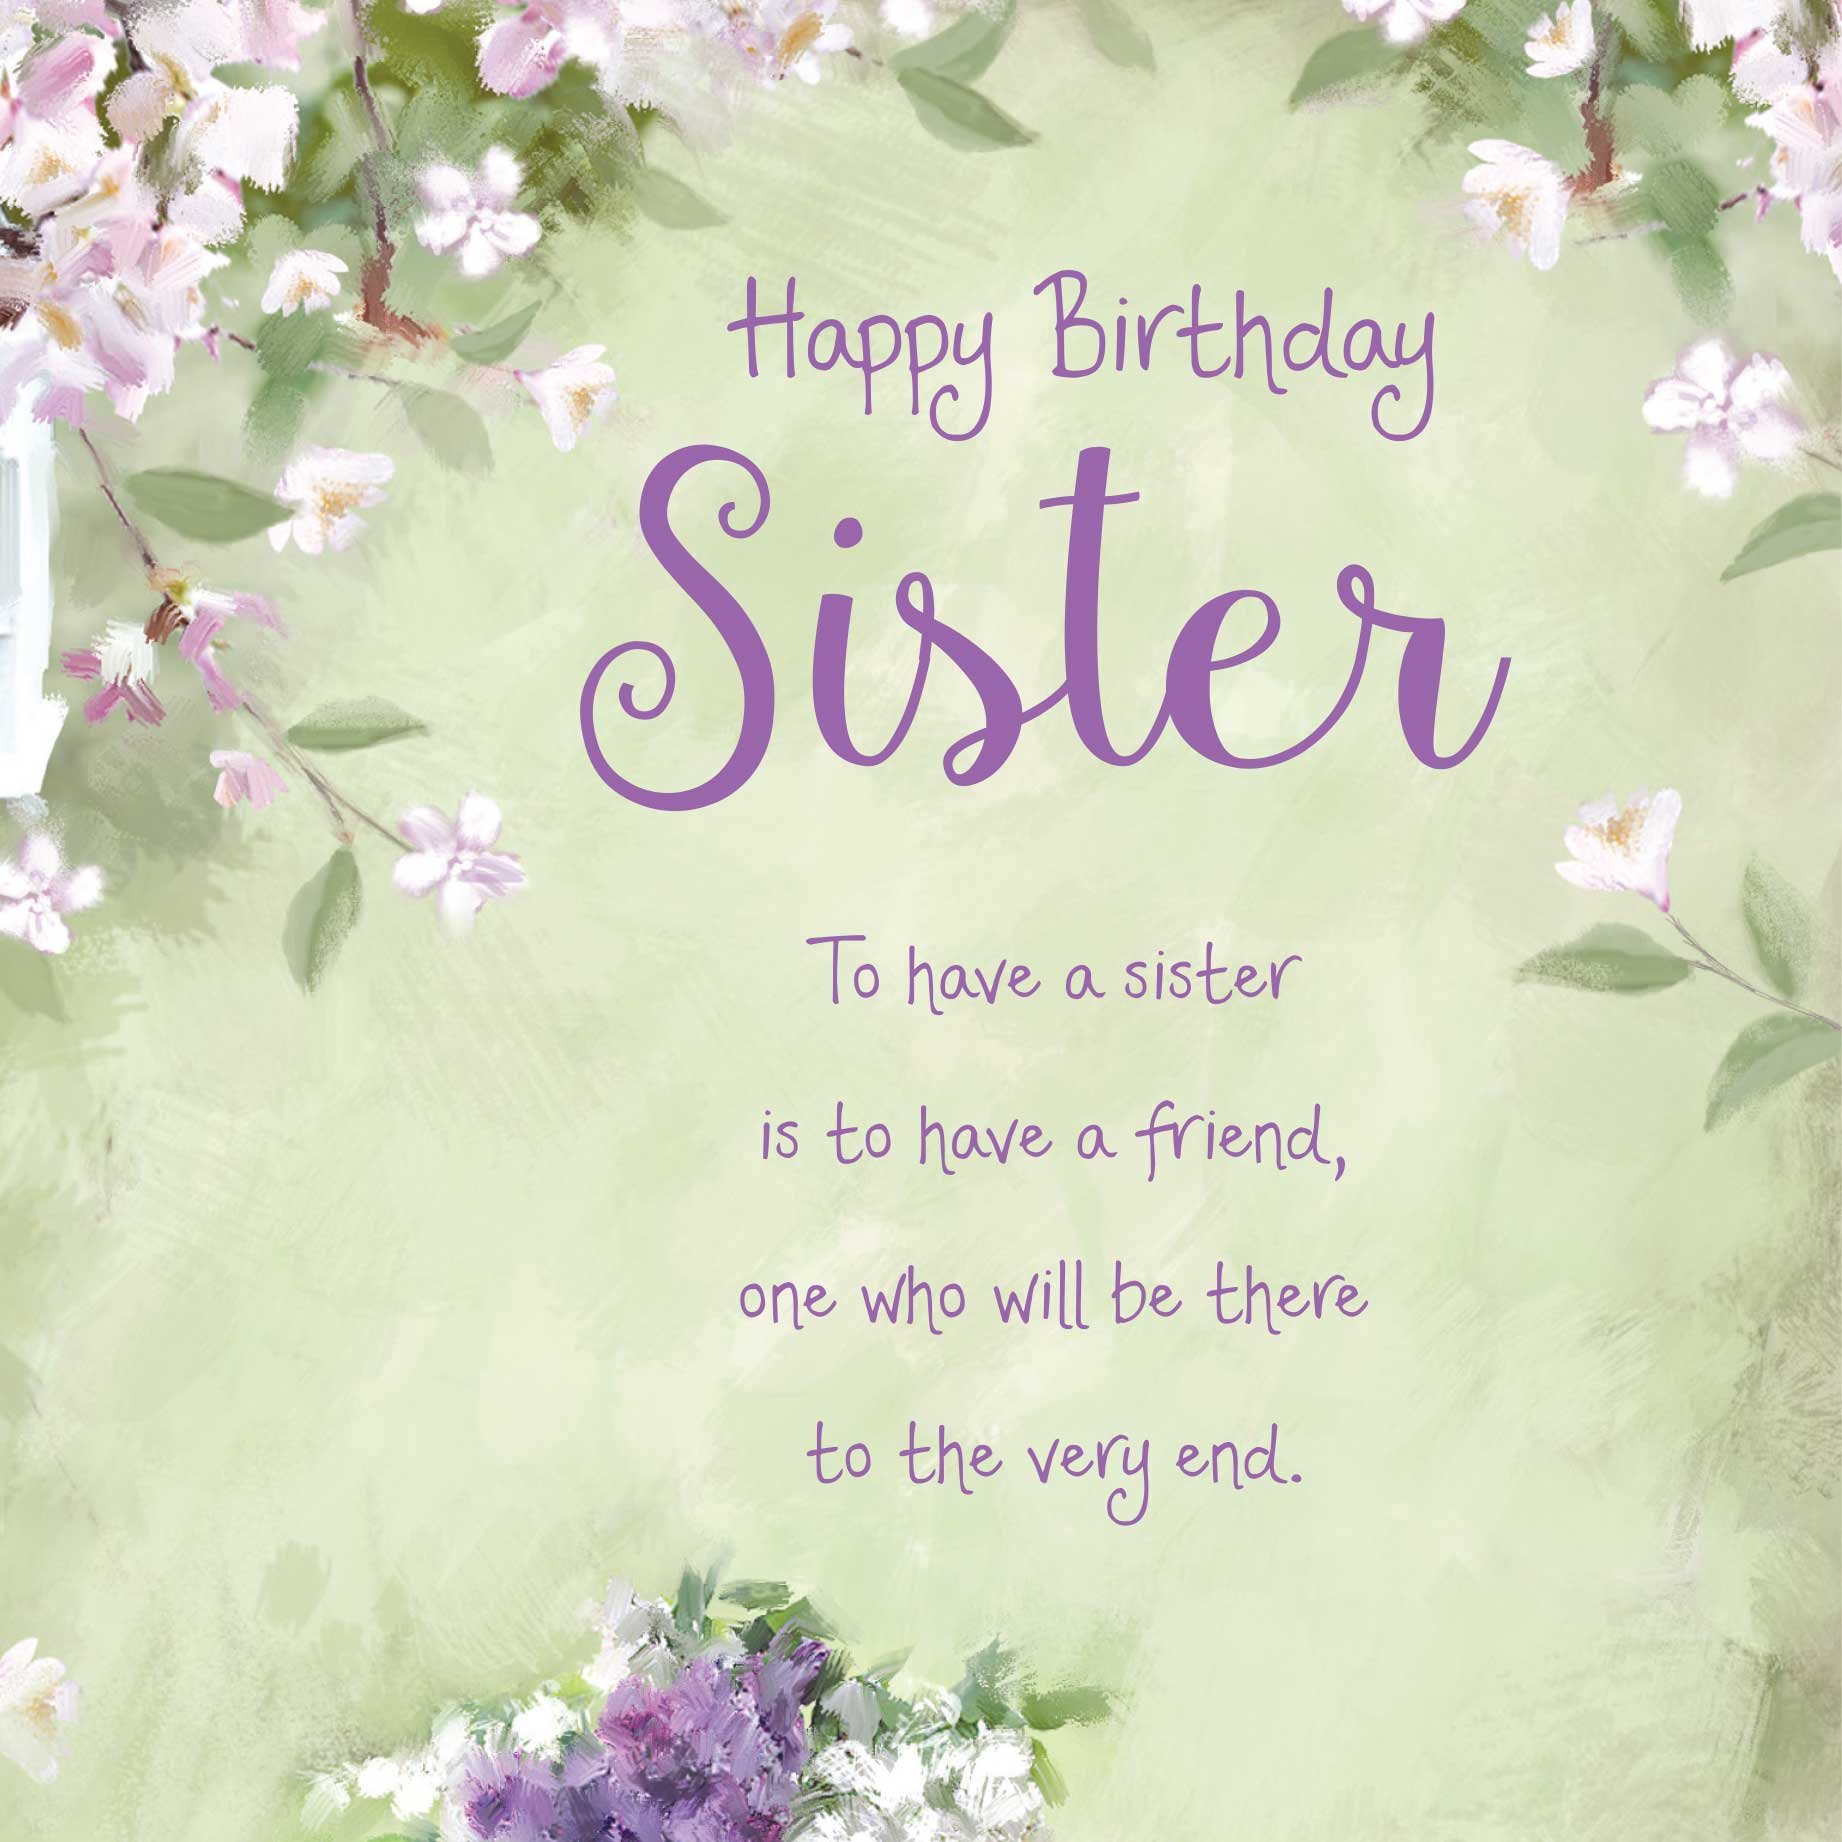 Sister s birthday. Happy Birthday Wishes for sister. Happy Birthday my Dear sister. Happy Birthday сестра. Happy Birthday to my Lovely sister.